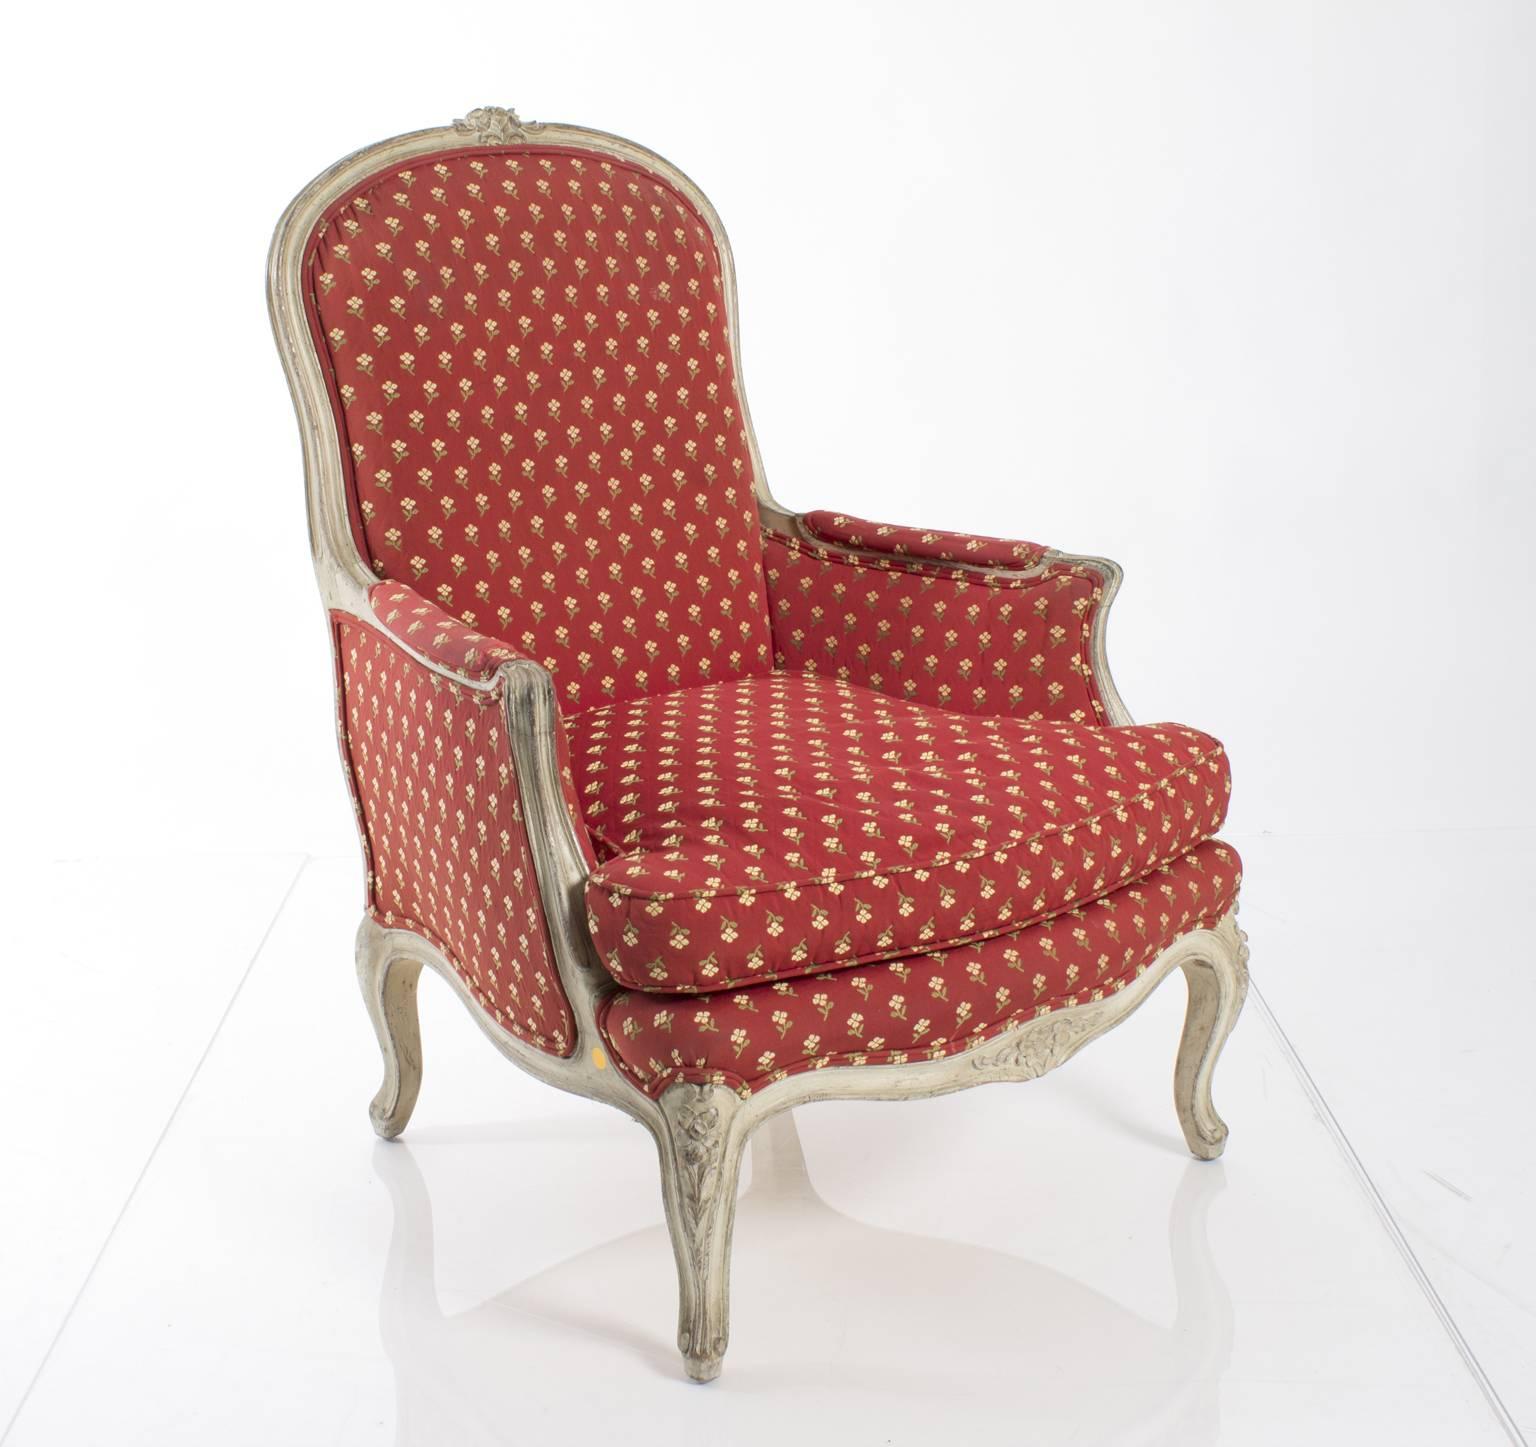 Pair of French bergères upholstered in a red and yellow floral print fabric.
   